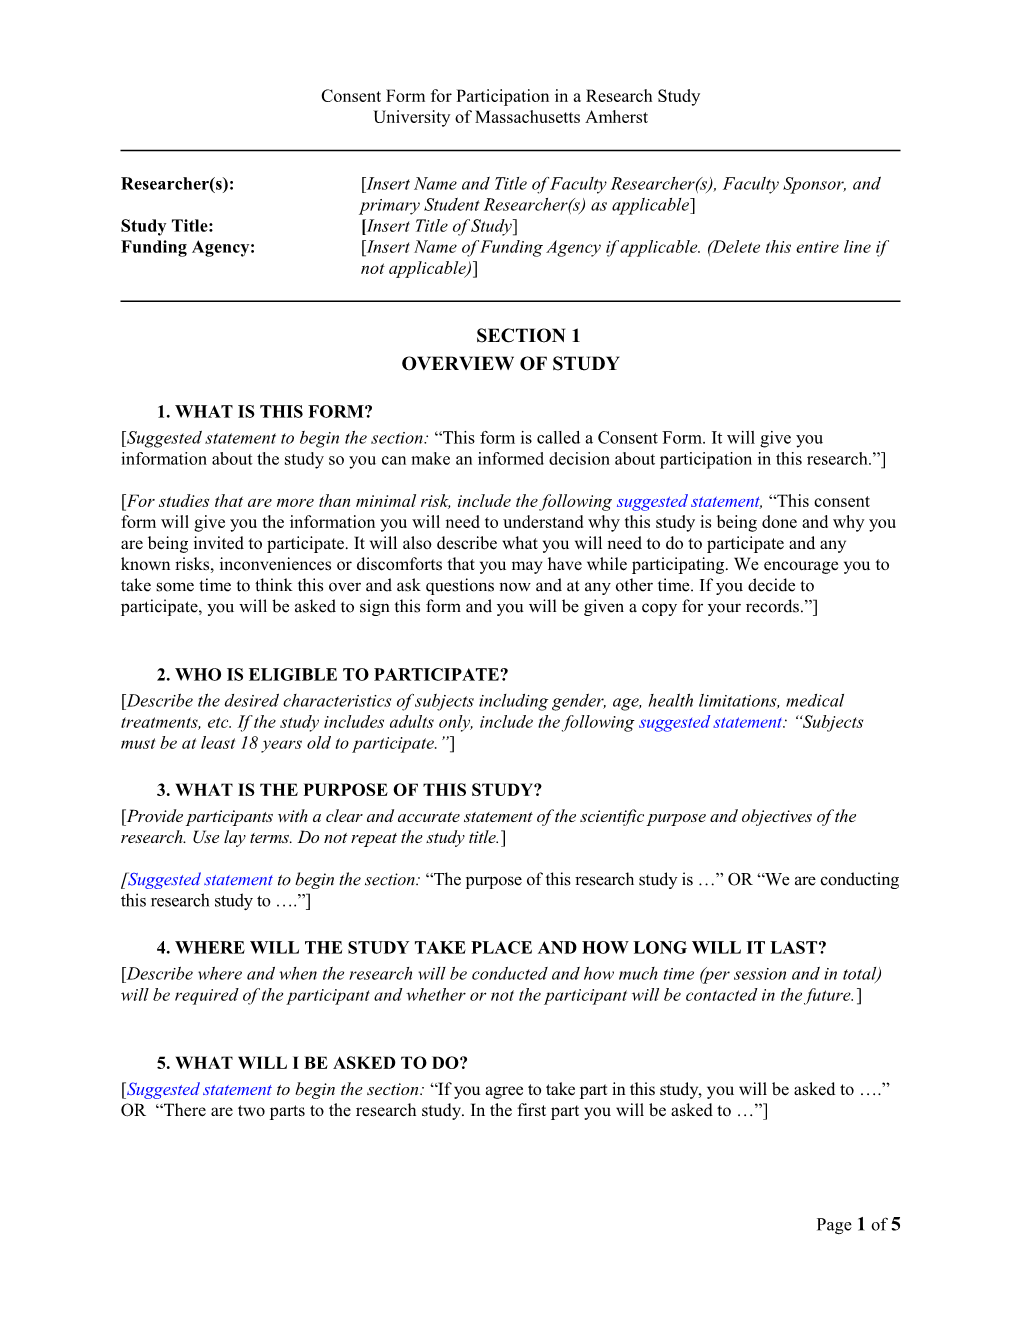 Consent Form for Participation in a Research Study s2